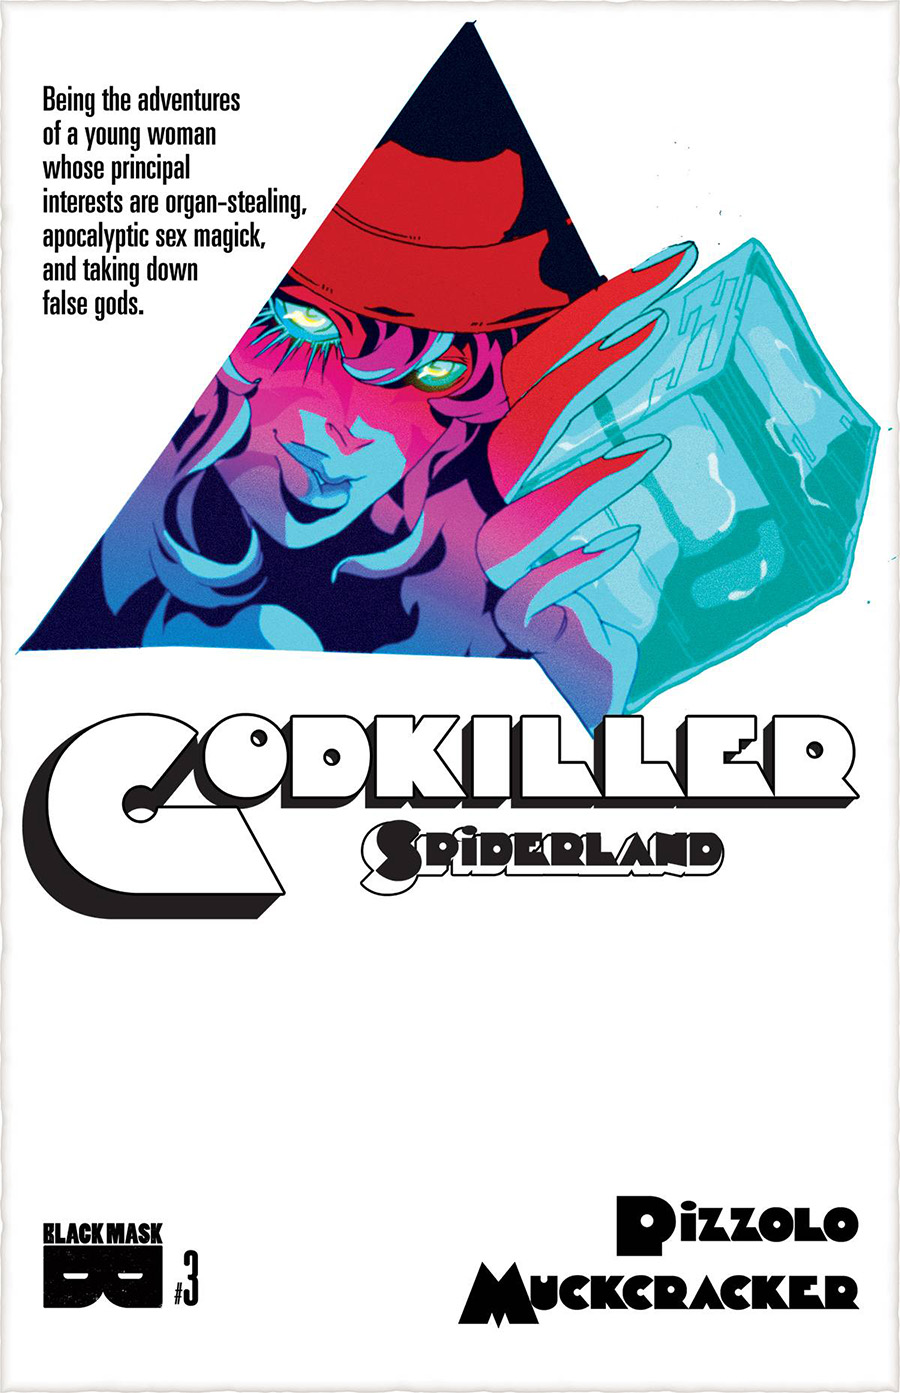 Godkiller Spiderland #3 Cover A With Polybag